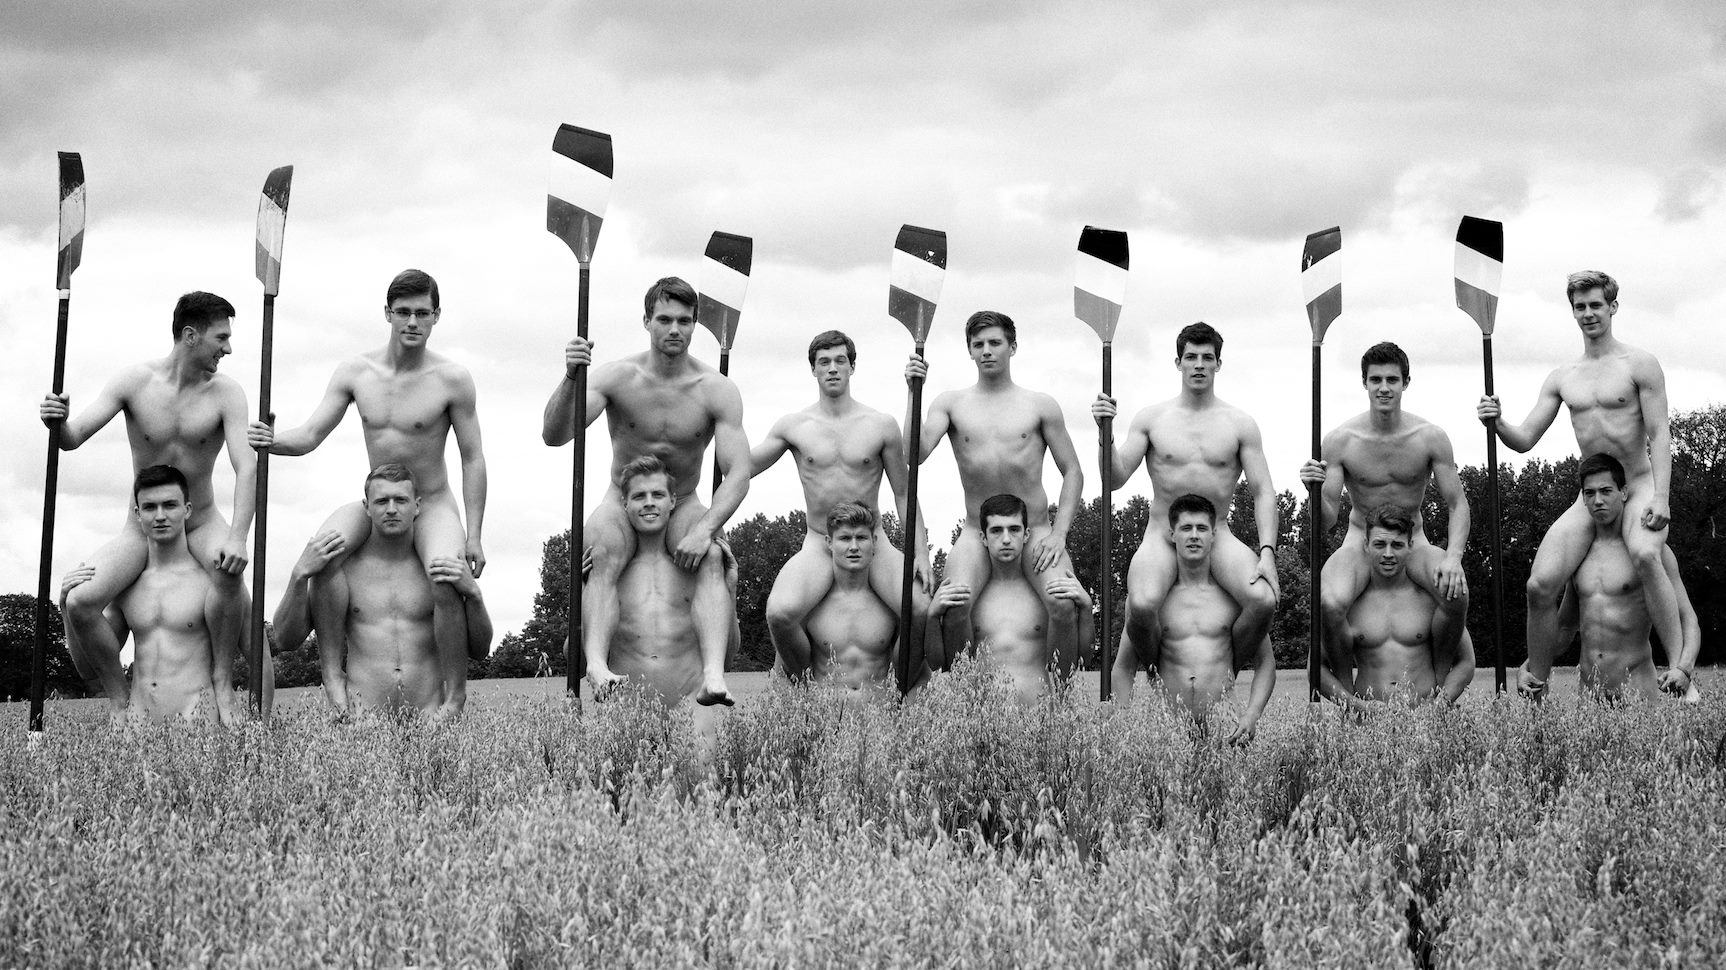 Charity calendar stars the Warwick Rowers banned from 